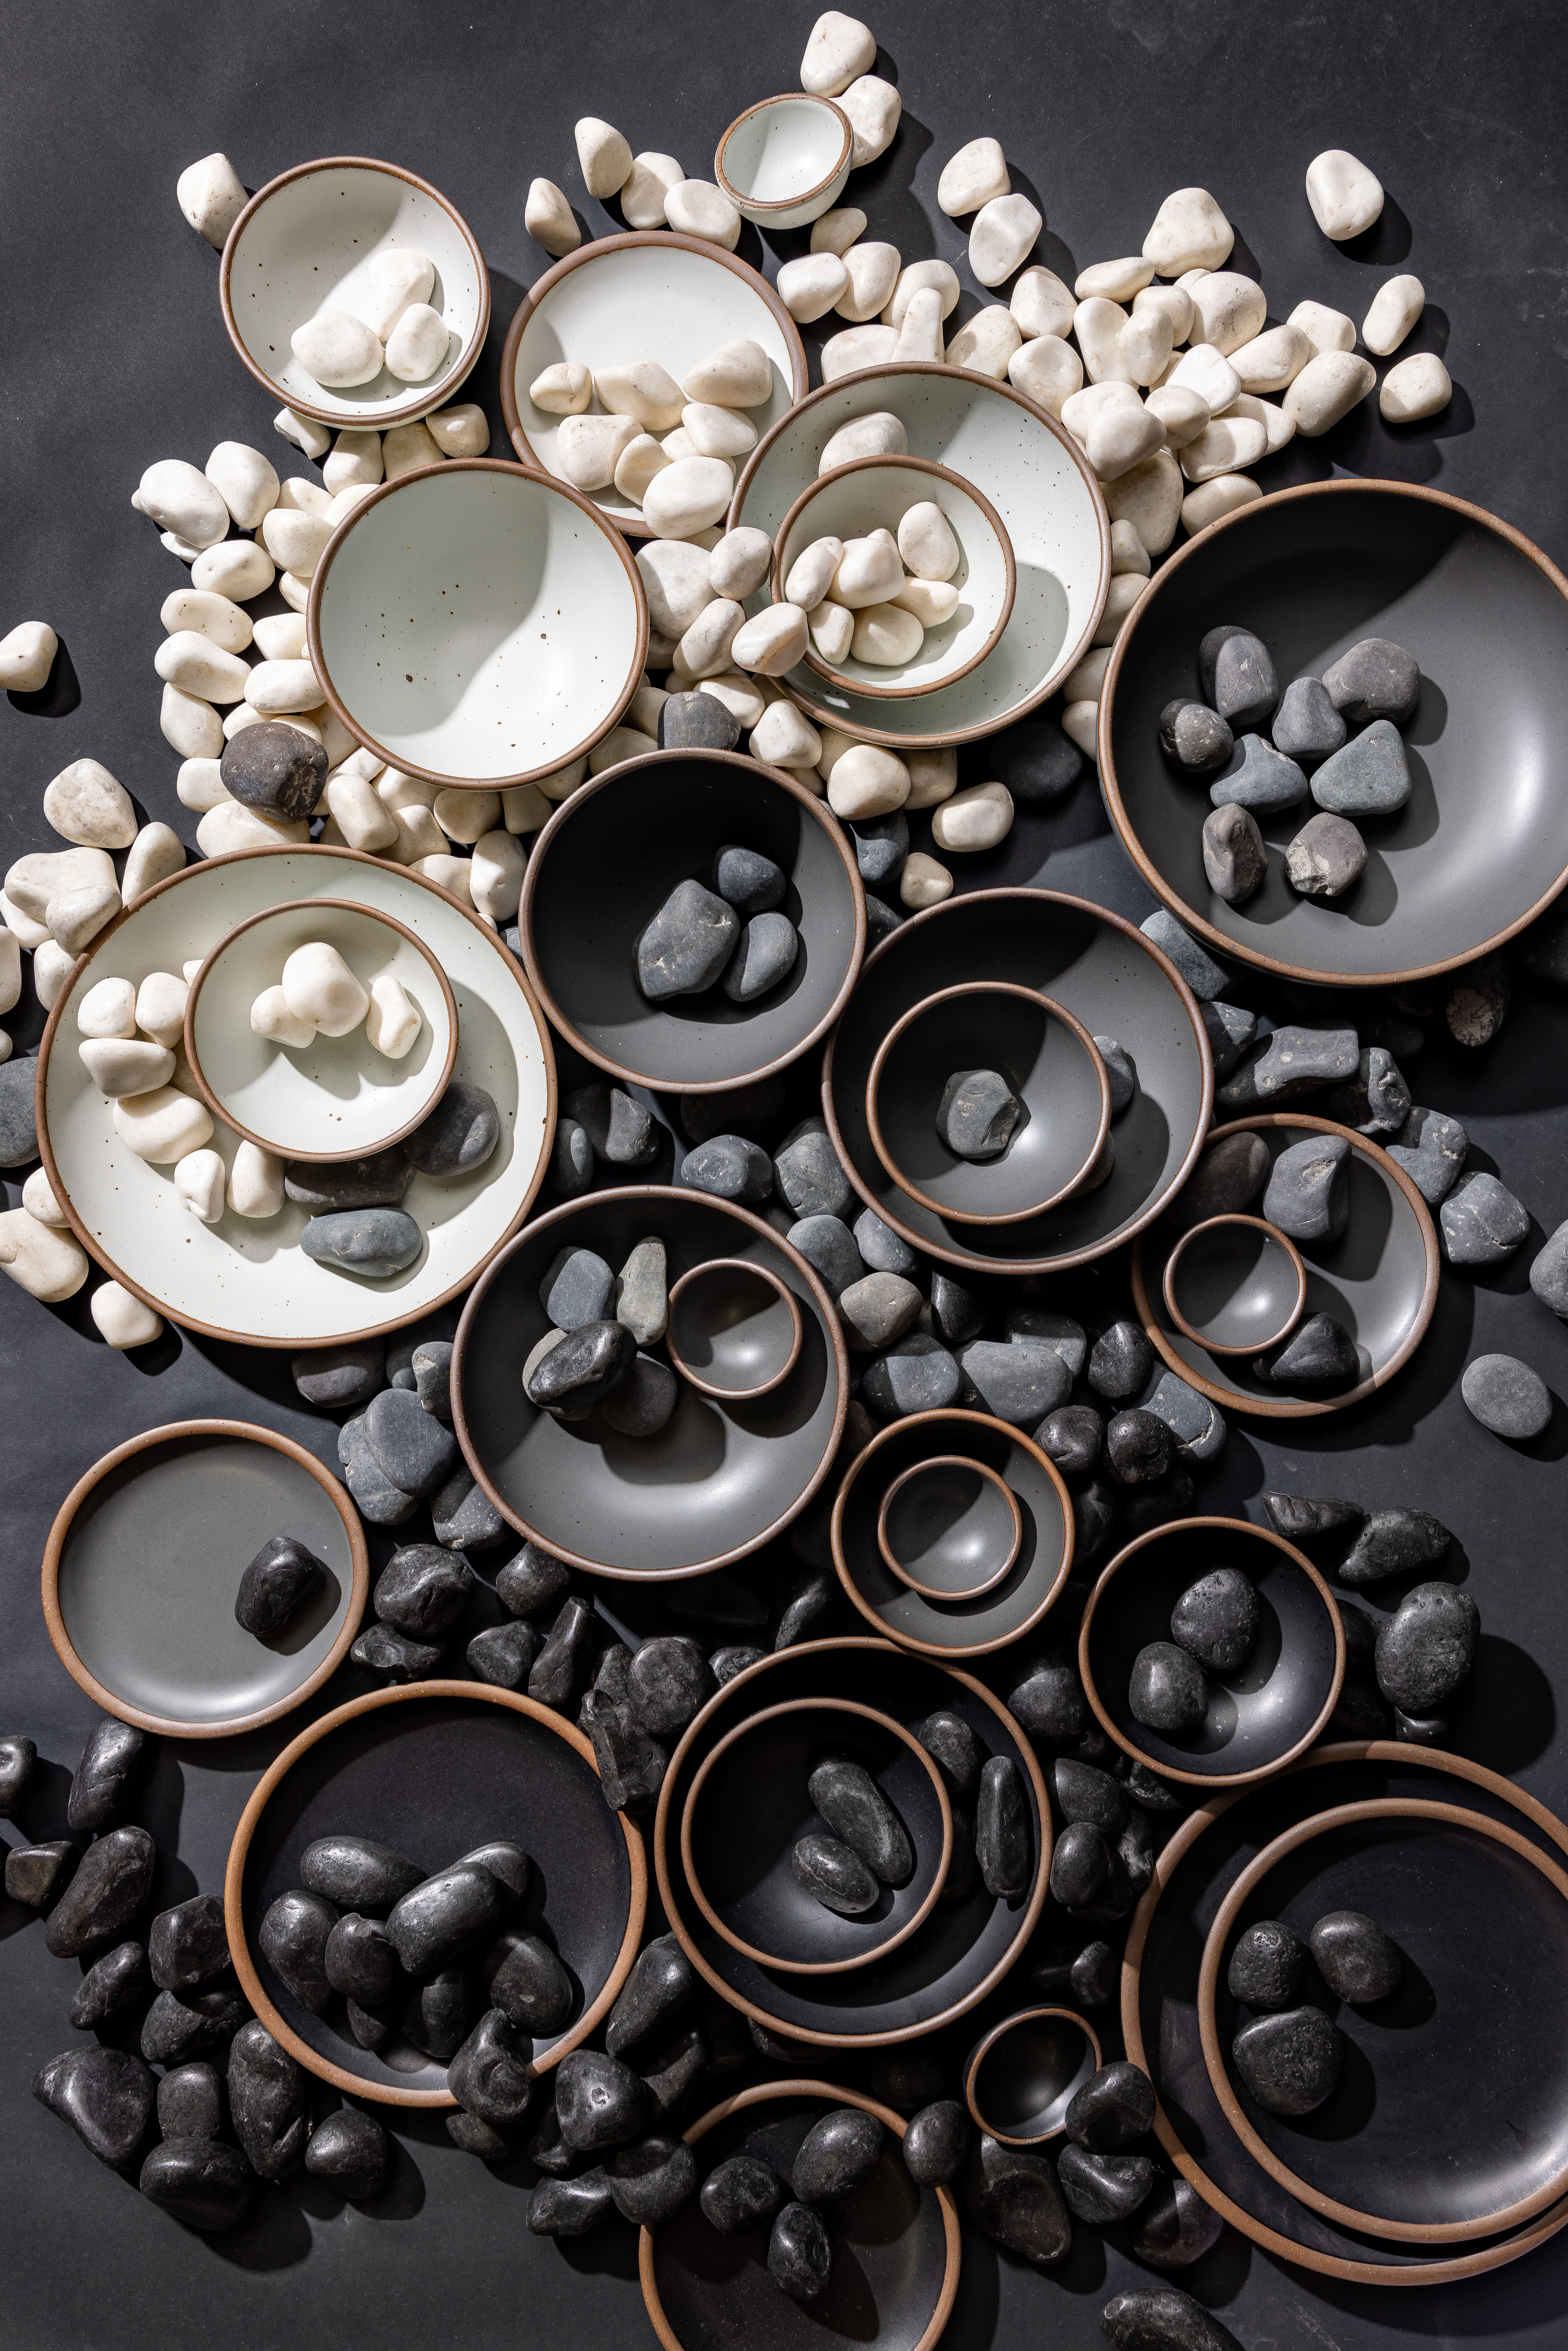 An overhead view of ceramic bowls and plates in various sizes in soft cool white, medium cool grey, and graphite - surrounded and filled by rocks of varying sizes and grayscale colors to match the pottery.